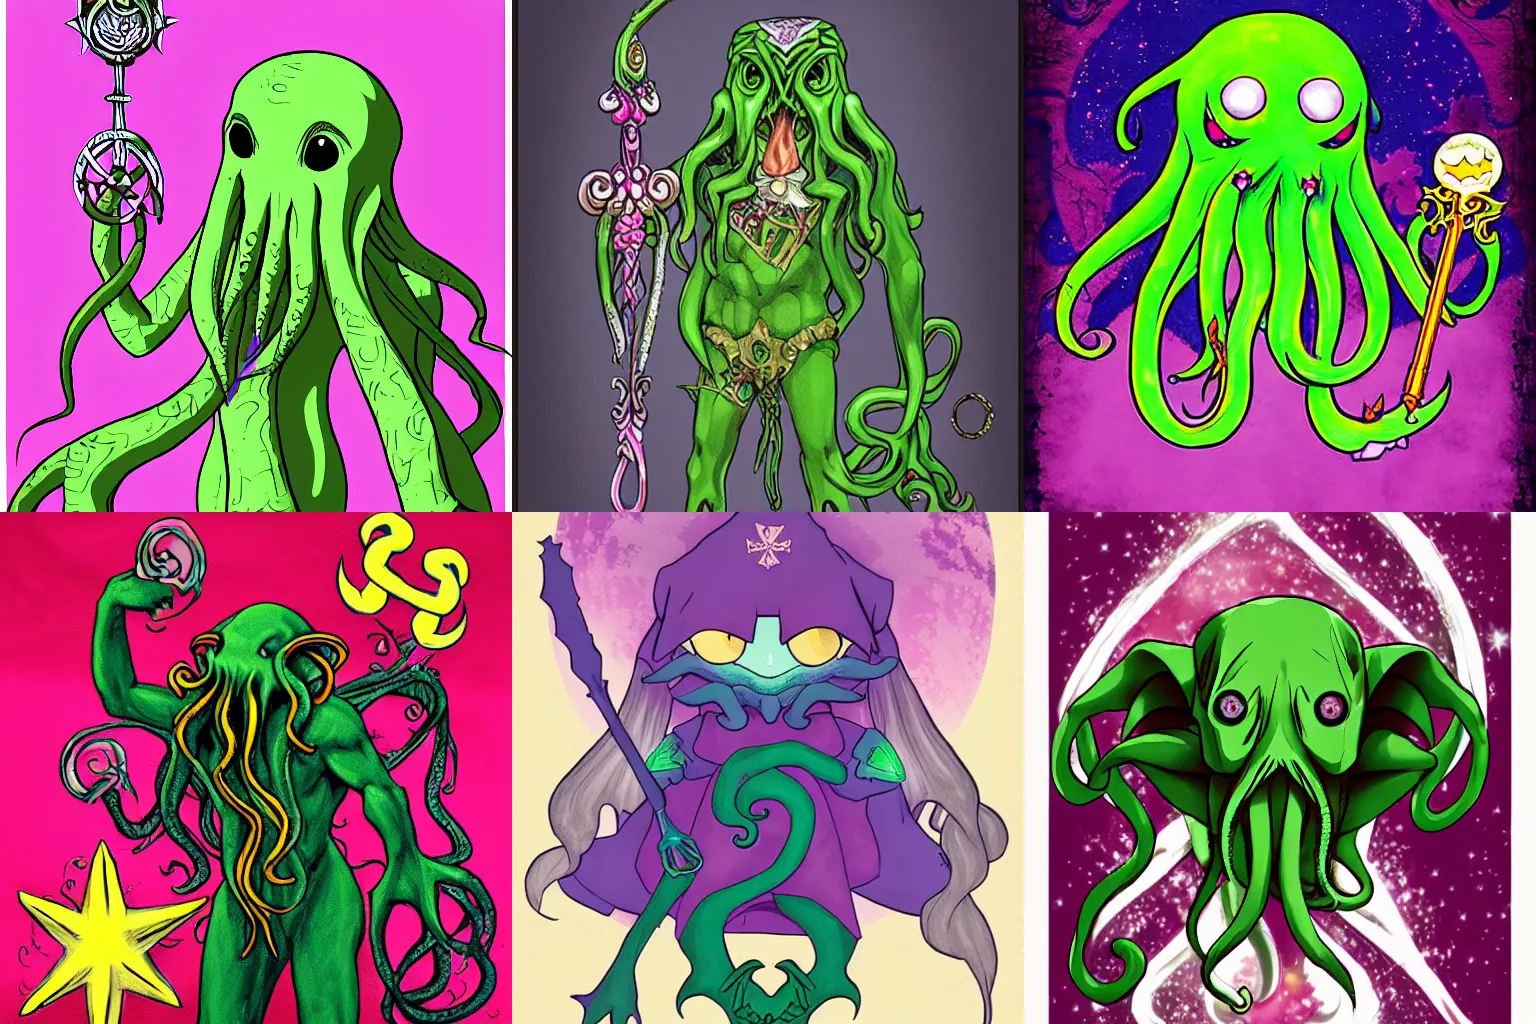 Prompt: Cthulhu dressed as a magical girl